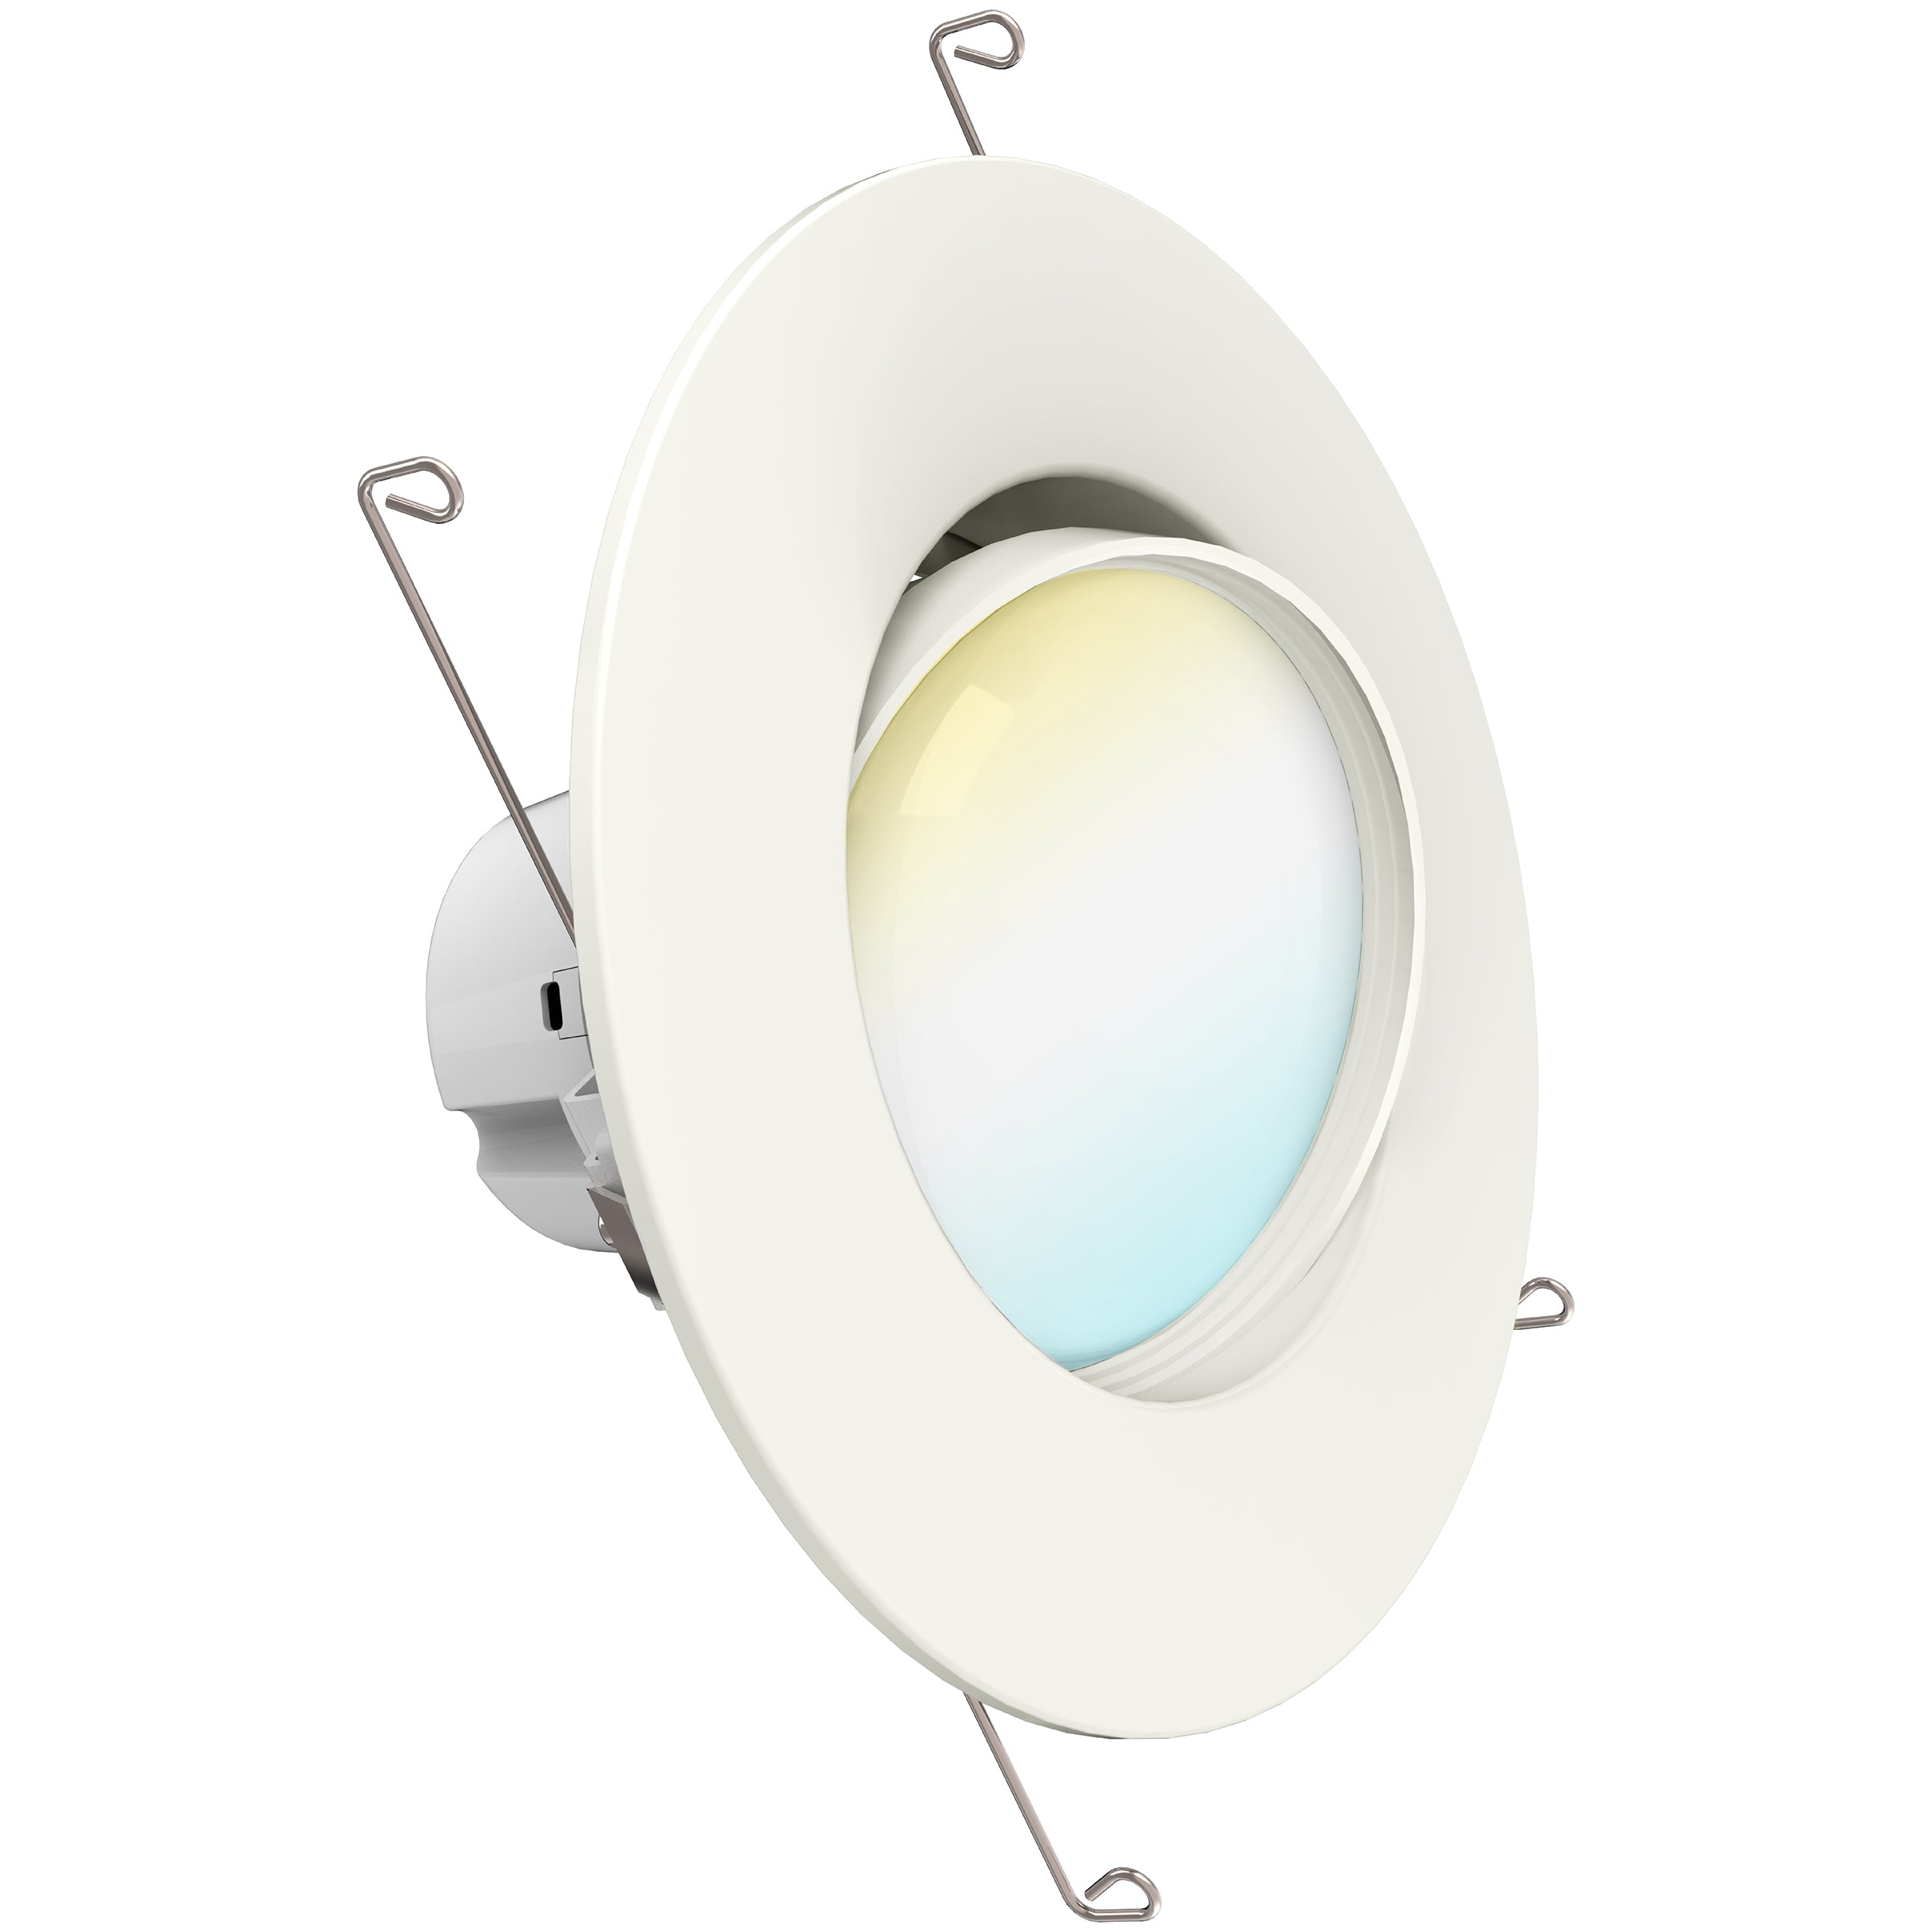 This LED retrofit downlight with a gimbal optic fits 5-inch or 6-inch recessed cans. Adjust CCT settings to change the white light quality to suit your needs. Slide the switch to select color temperature during installation. Choose from 2700K, 3000K, 3500K, 4000K, 5000K to change the light from warm to cool. This dimmable recessed light is damp rated for indoor use or for outside in a damp area You can see the spring clips here that help hold the light inside the recessed can housing.